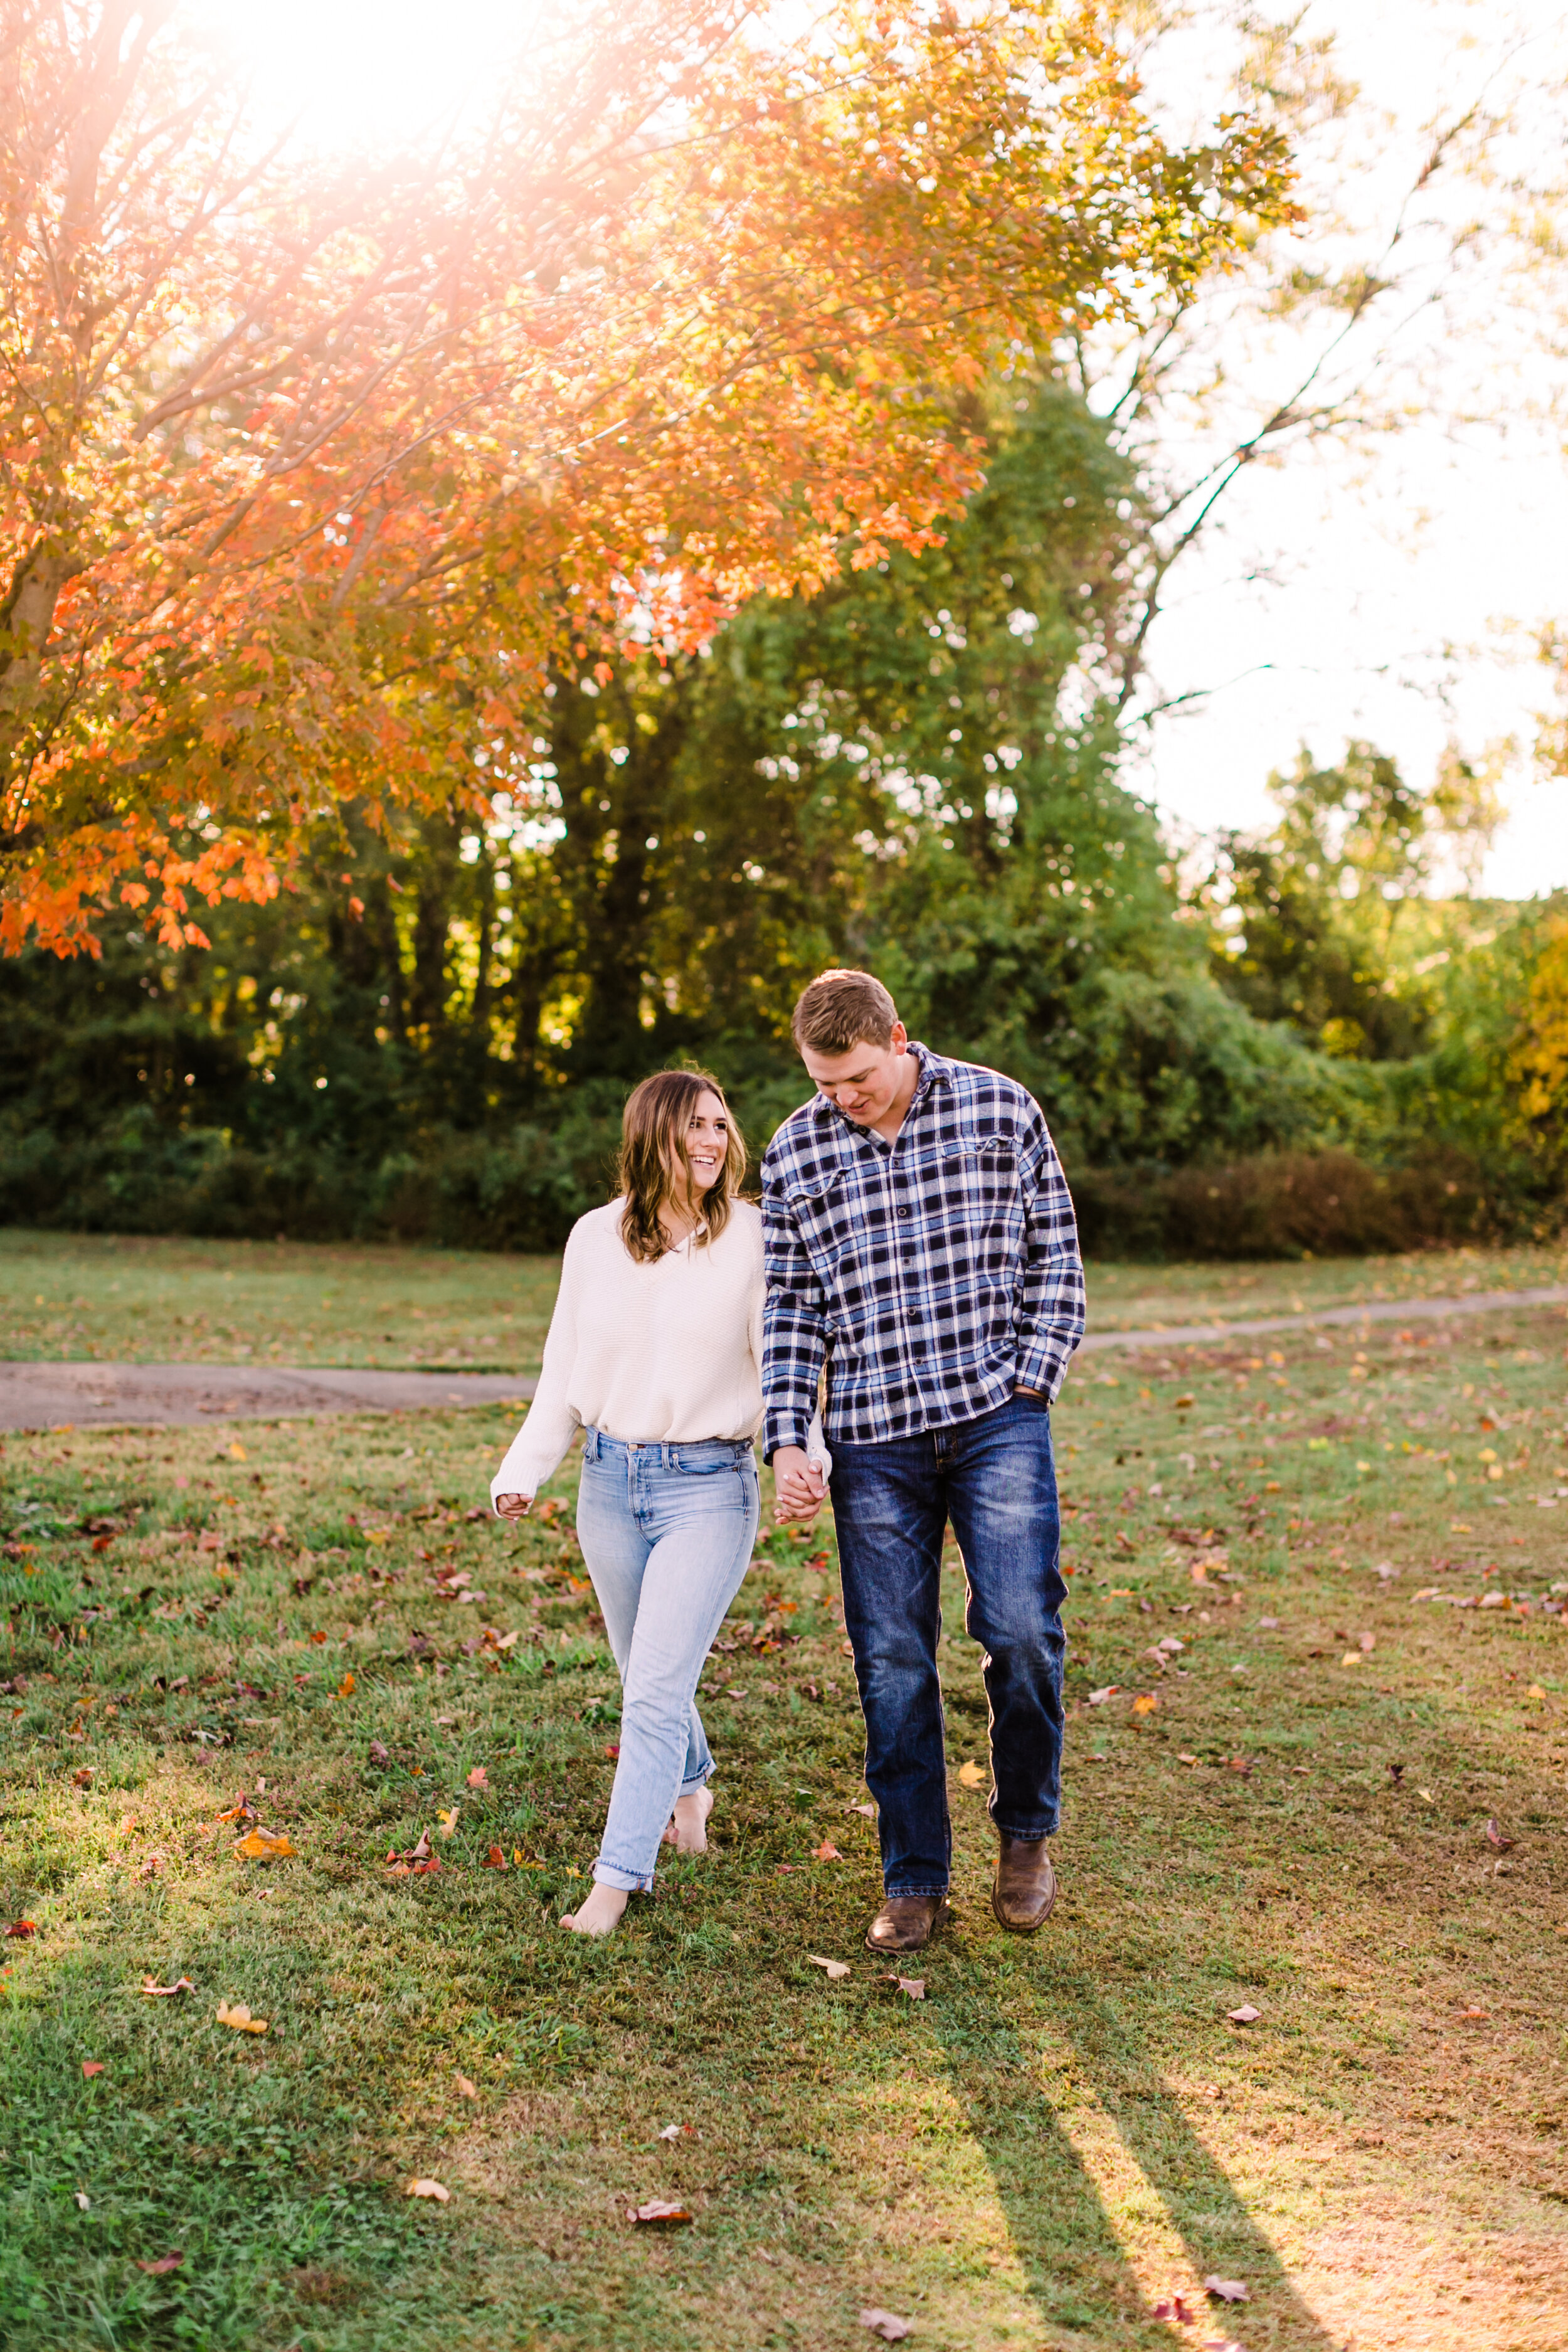 Tennessee+Fall+Engagement+Photos+Puppy (5 of 63).jpg